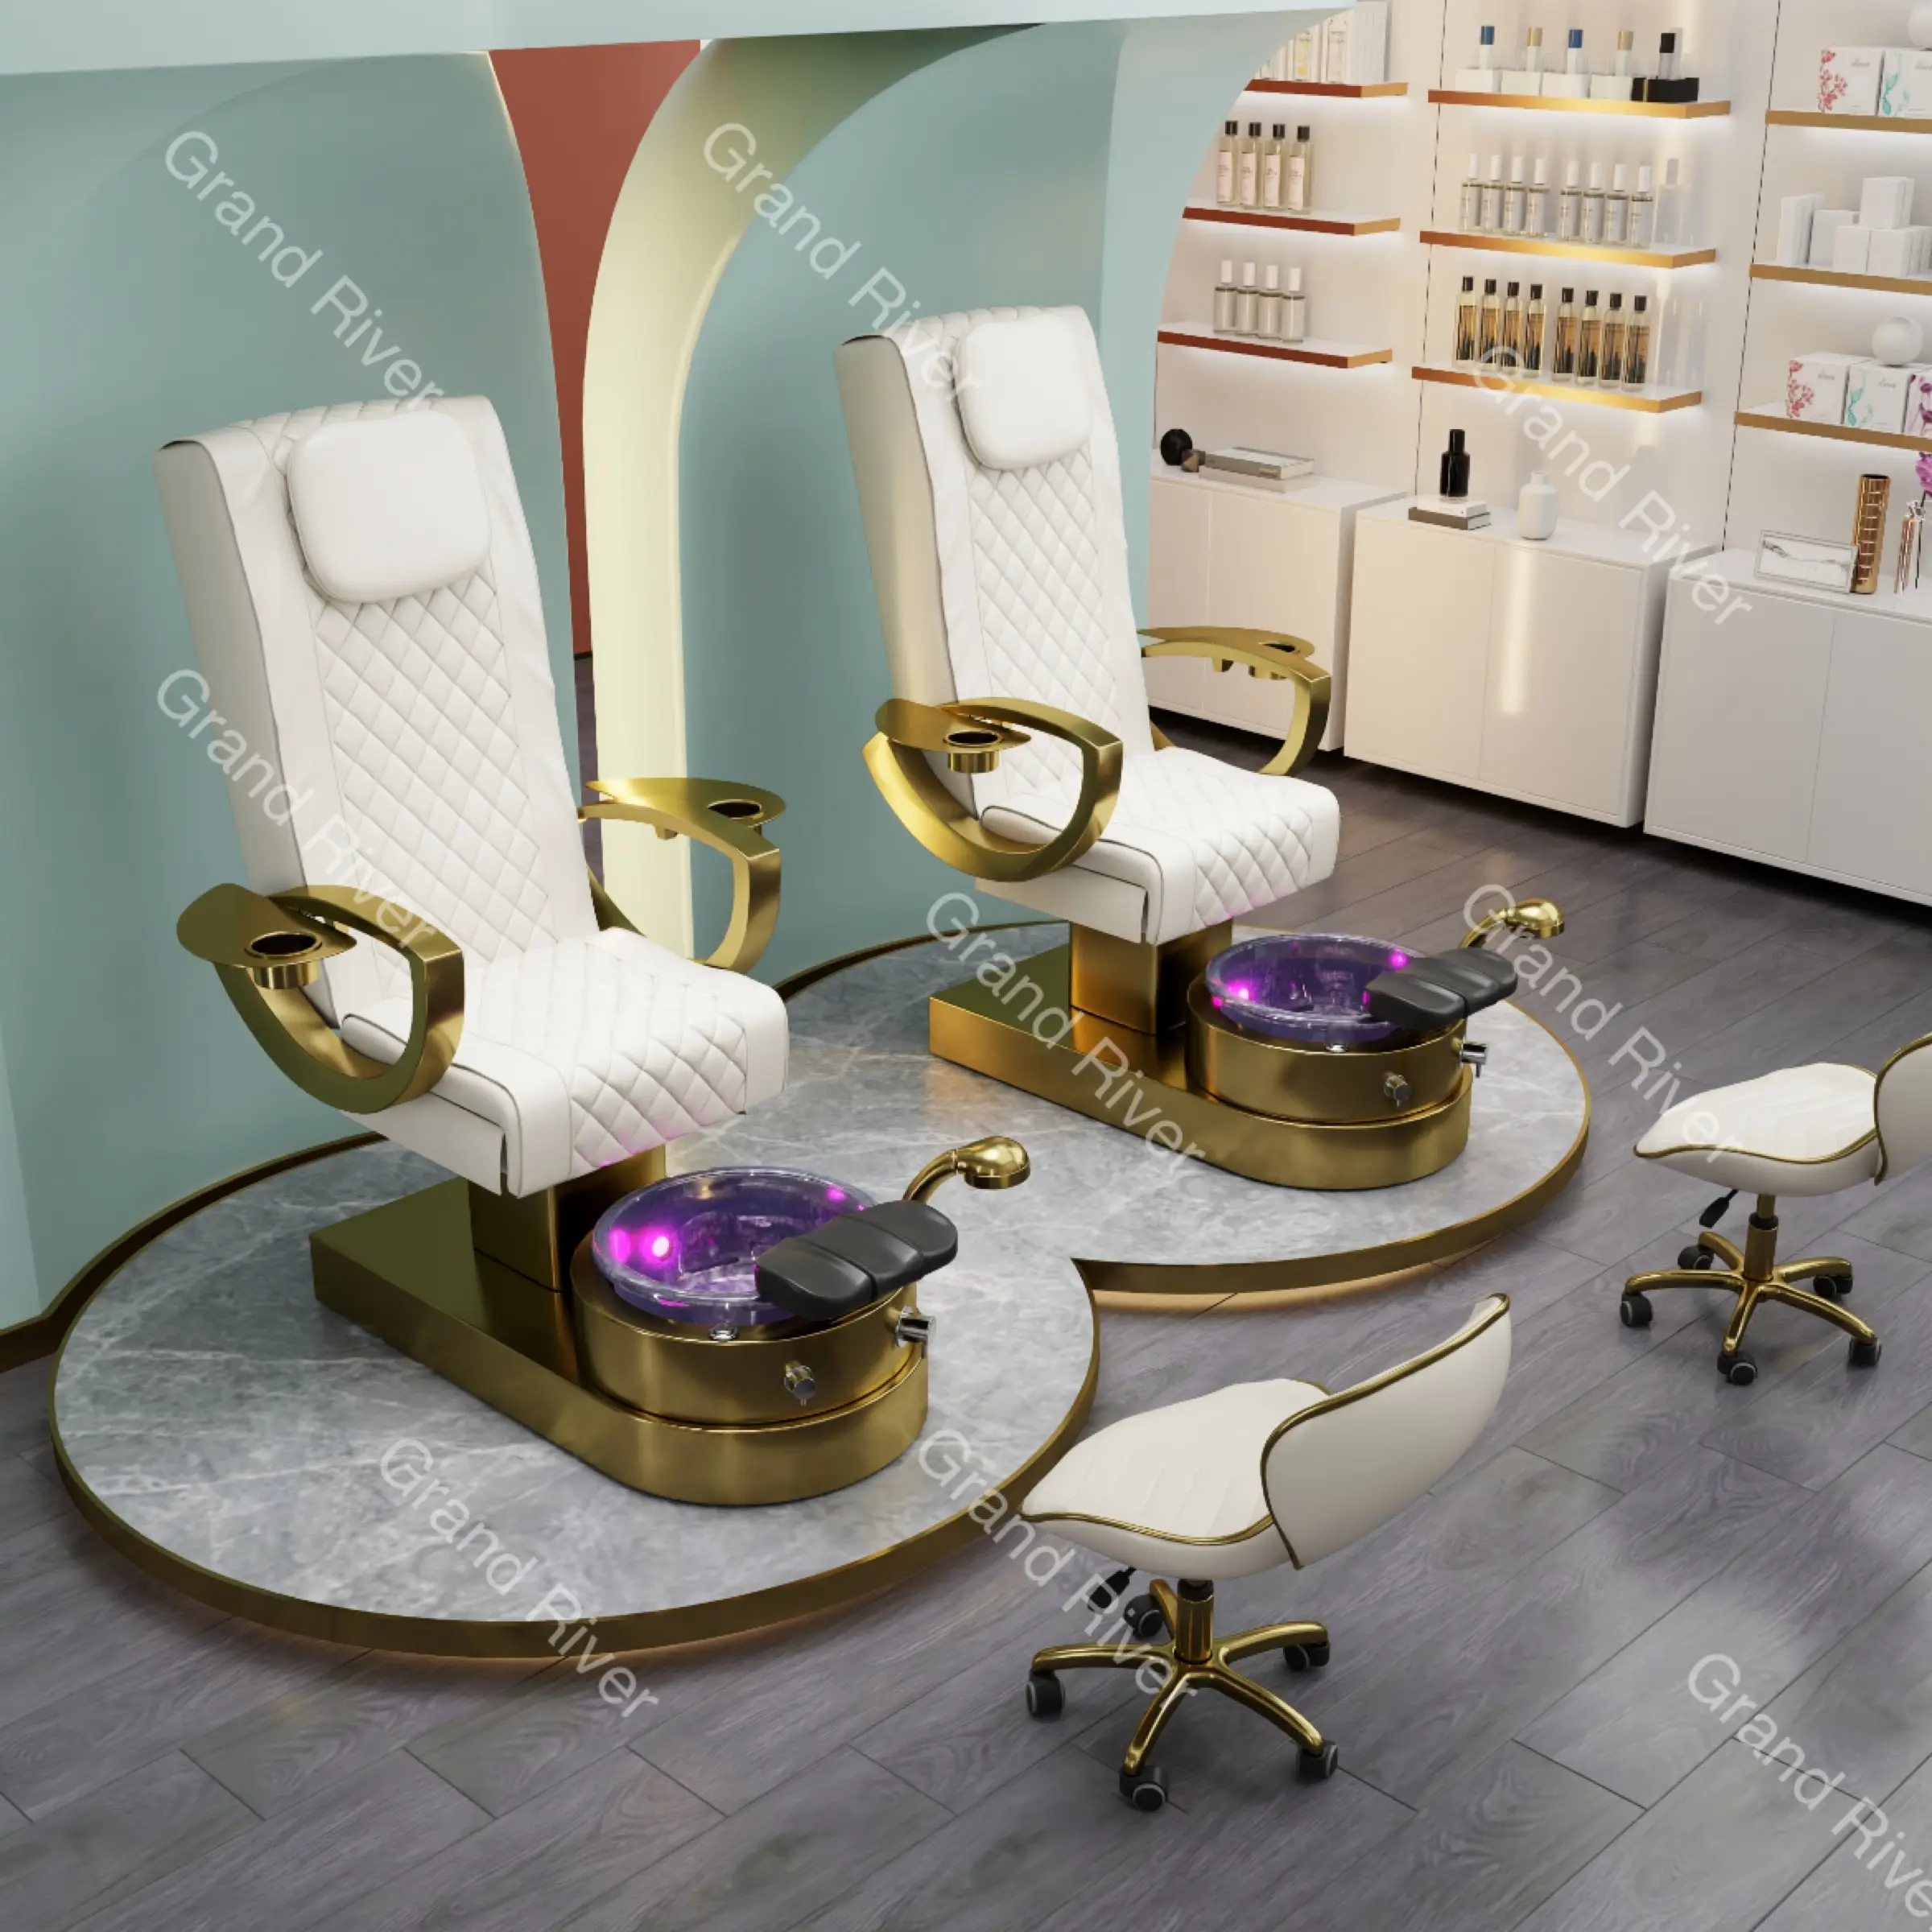 Factory Direct Nail Salon Furniture Equipment White Golden Electric Reclining Massage Manicure Foot Spa Luxury Pedicure